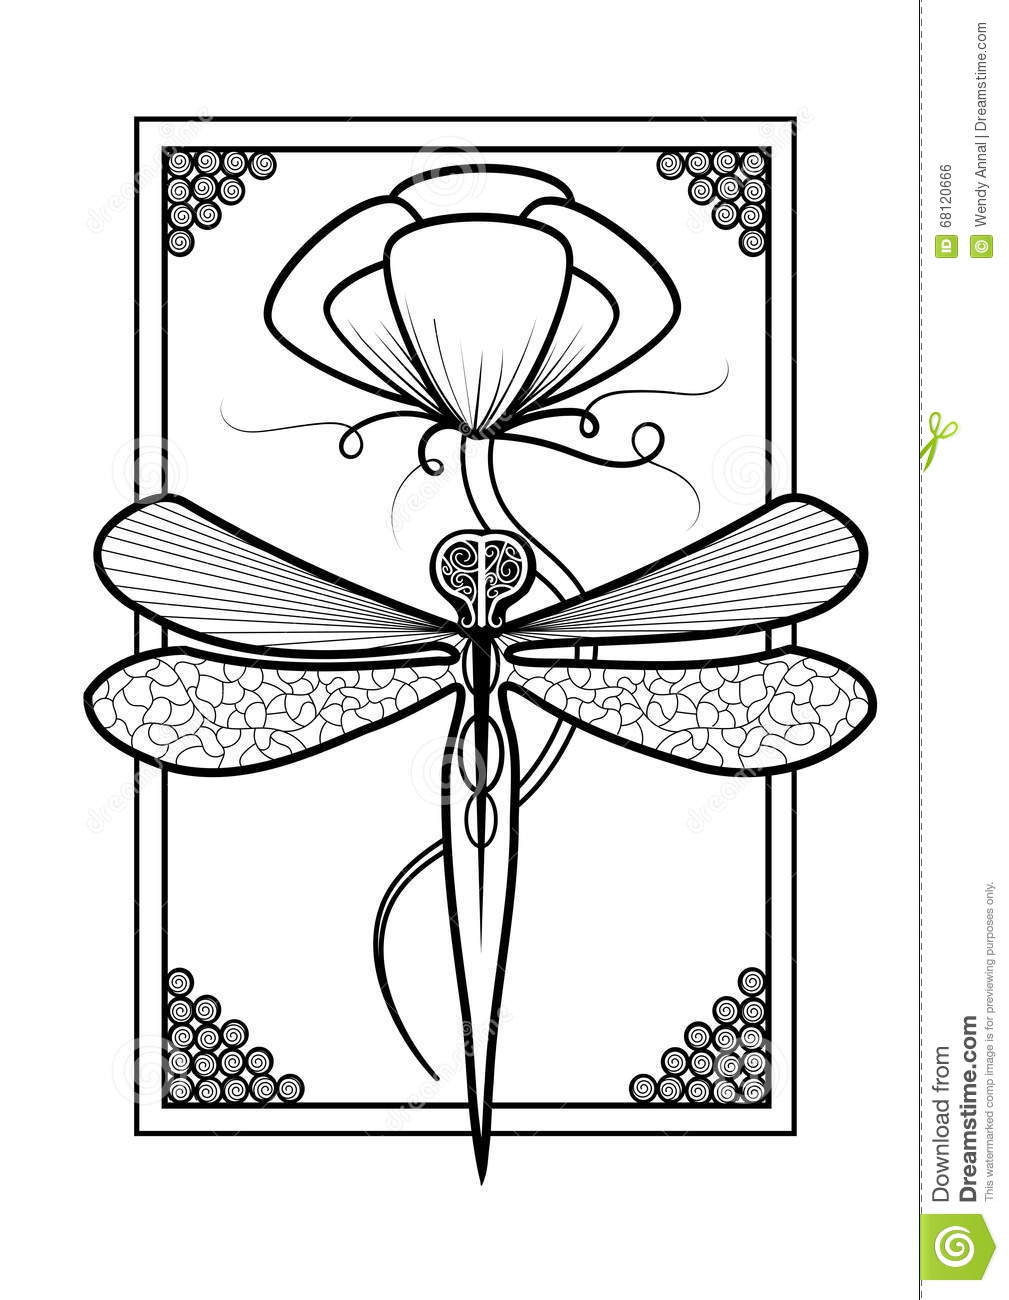 Dragonfly Coloring Pages For Adults
 Elegant Dragonfly Adult Coloring Page Design Stock